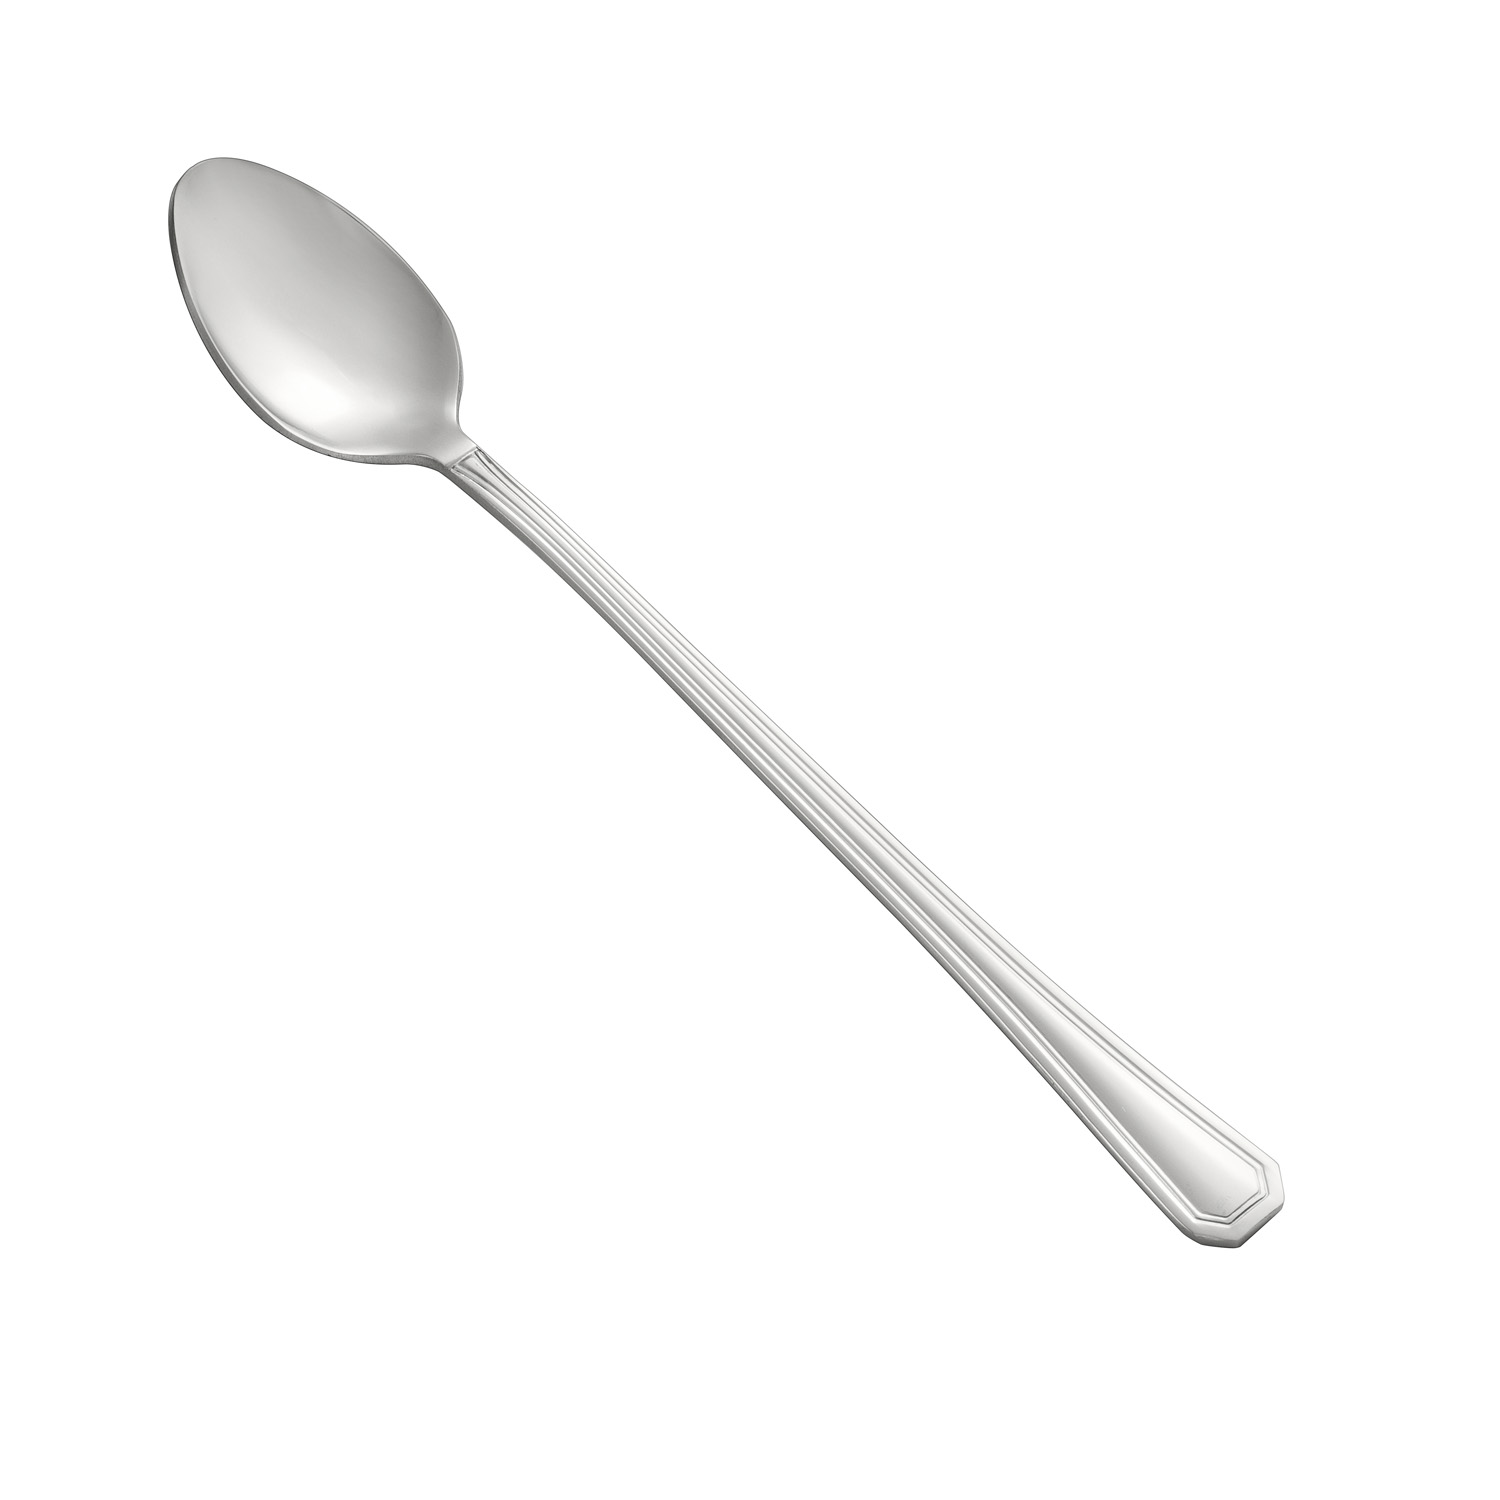 CAC China 8006-02 Lux Iced Tea Spoon, Extra Heavyweight 18/8, 7 1/2"